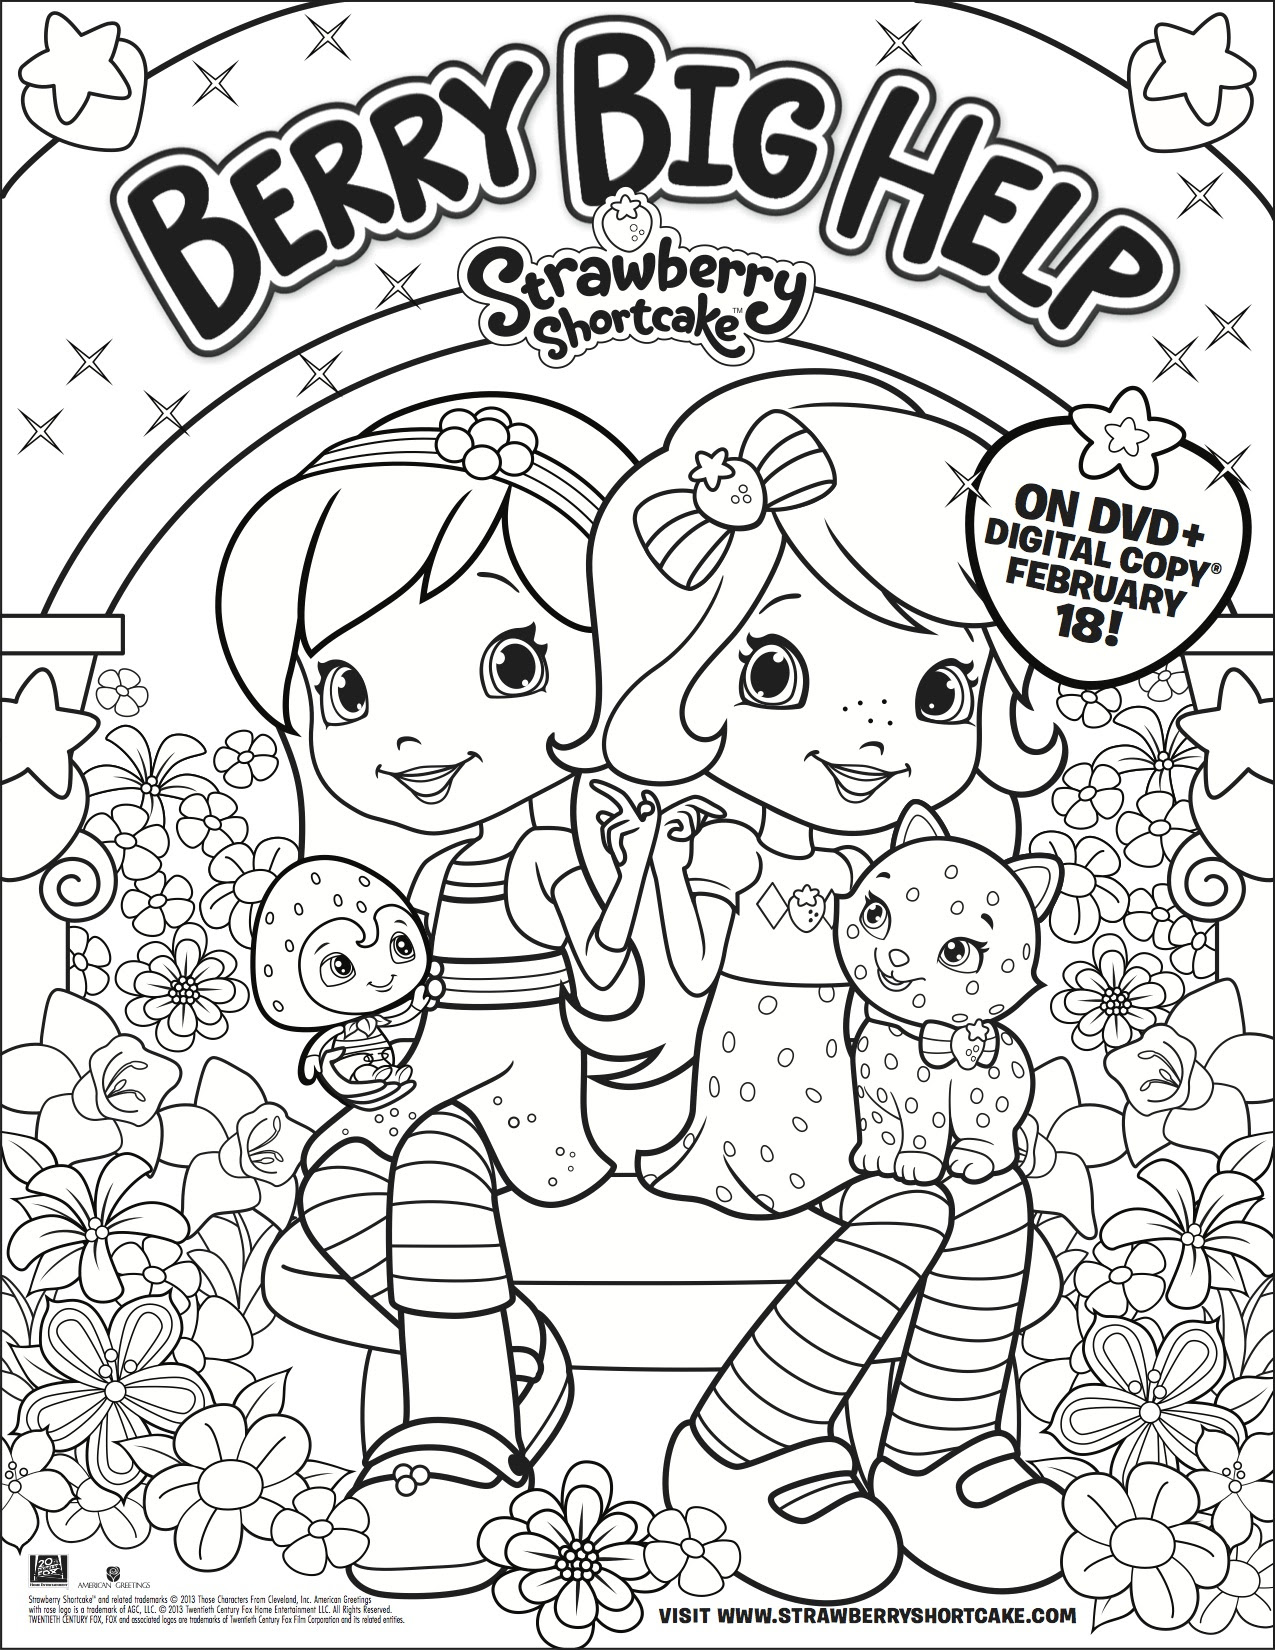 Strawberry Shortcake Coloring Book: Strawberry Shortcake Coloring Pages For  Everyone To Color, Have Fun With Many Premium Quality Images by Chase  Jackson